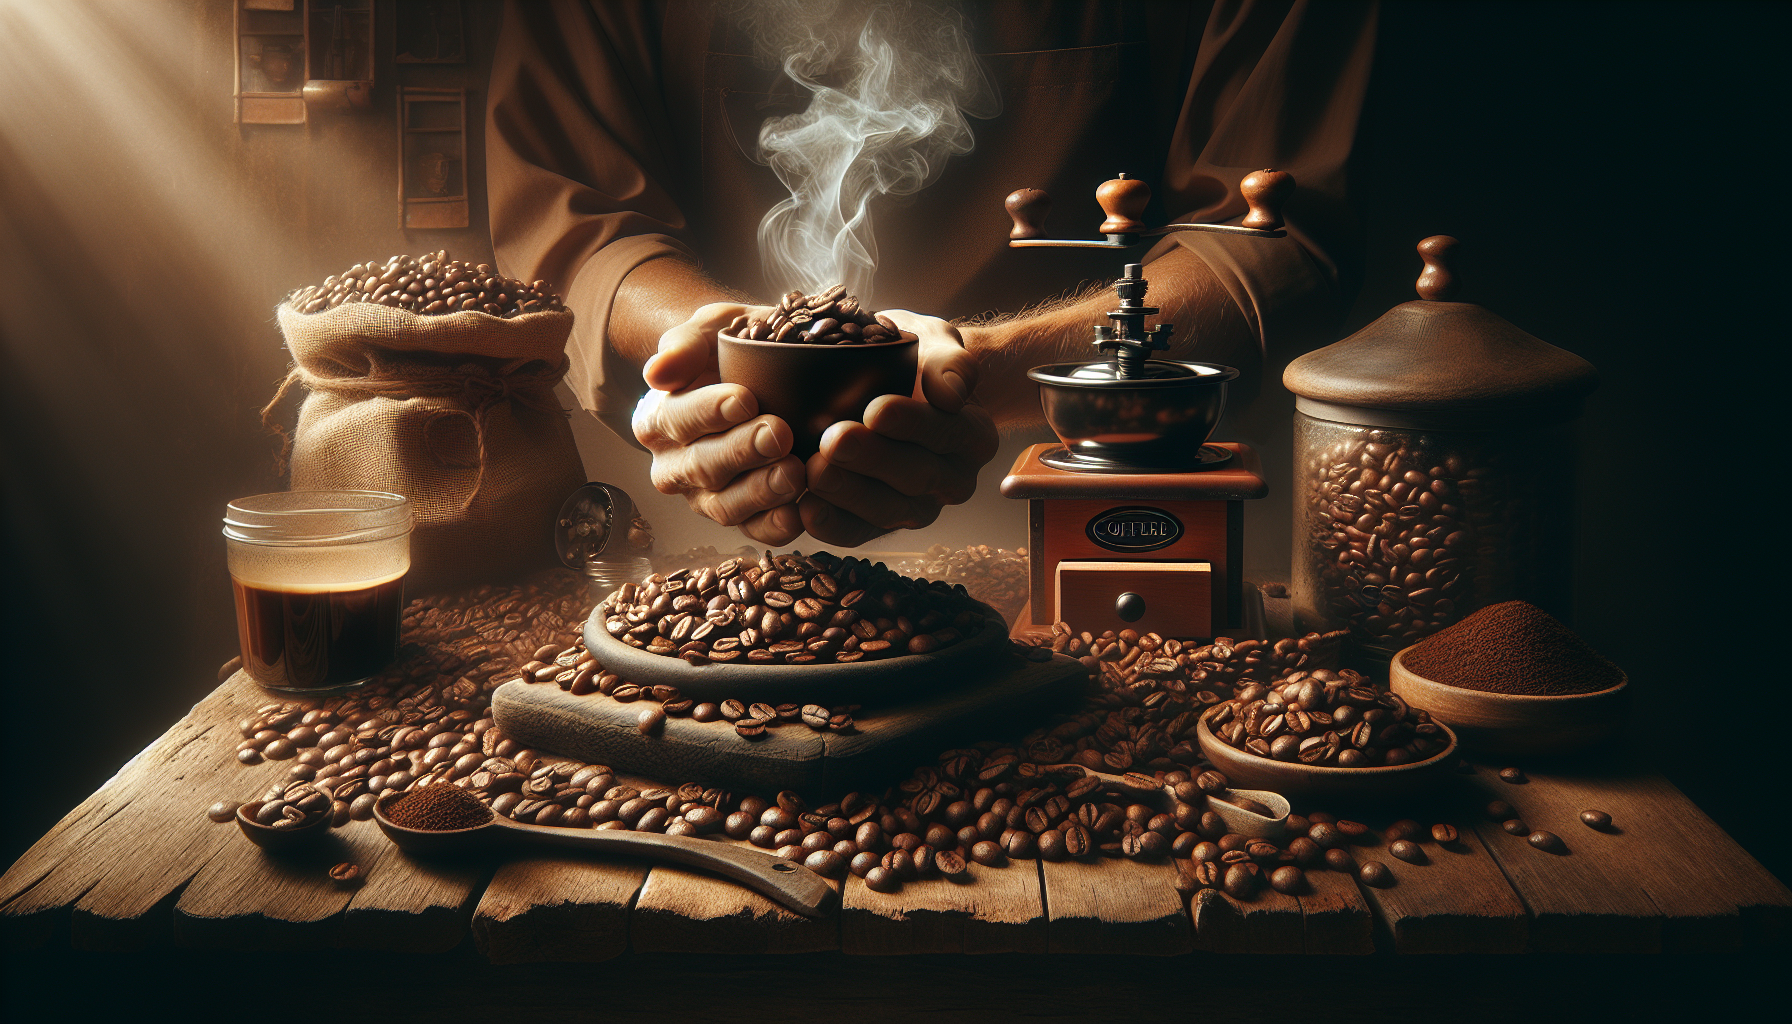 A visual journey that explores the richness of whole bean coffee. The scene depicts a pair of hands gently holding a pile of brown, glossy, whole coffee beans. The beans are aromatic and freshly roast